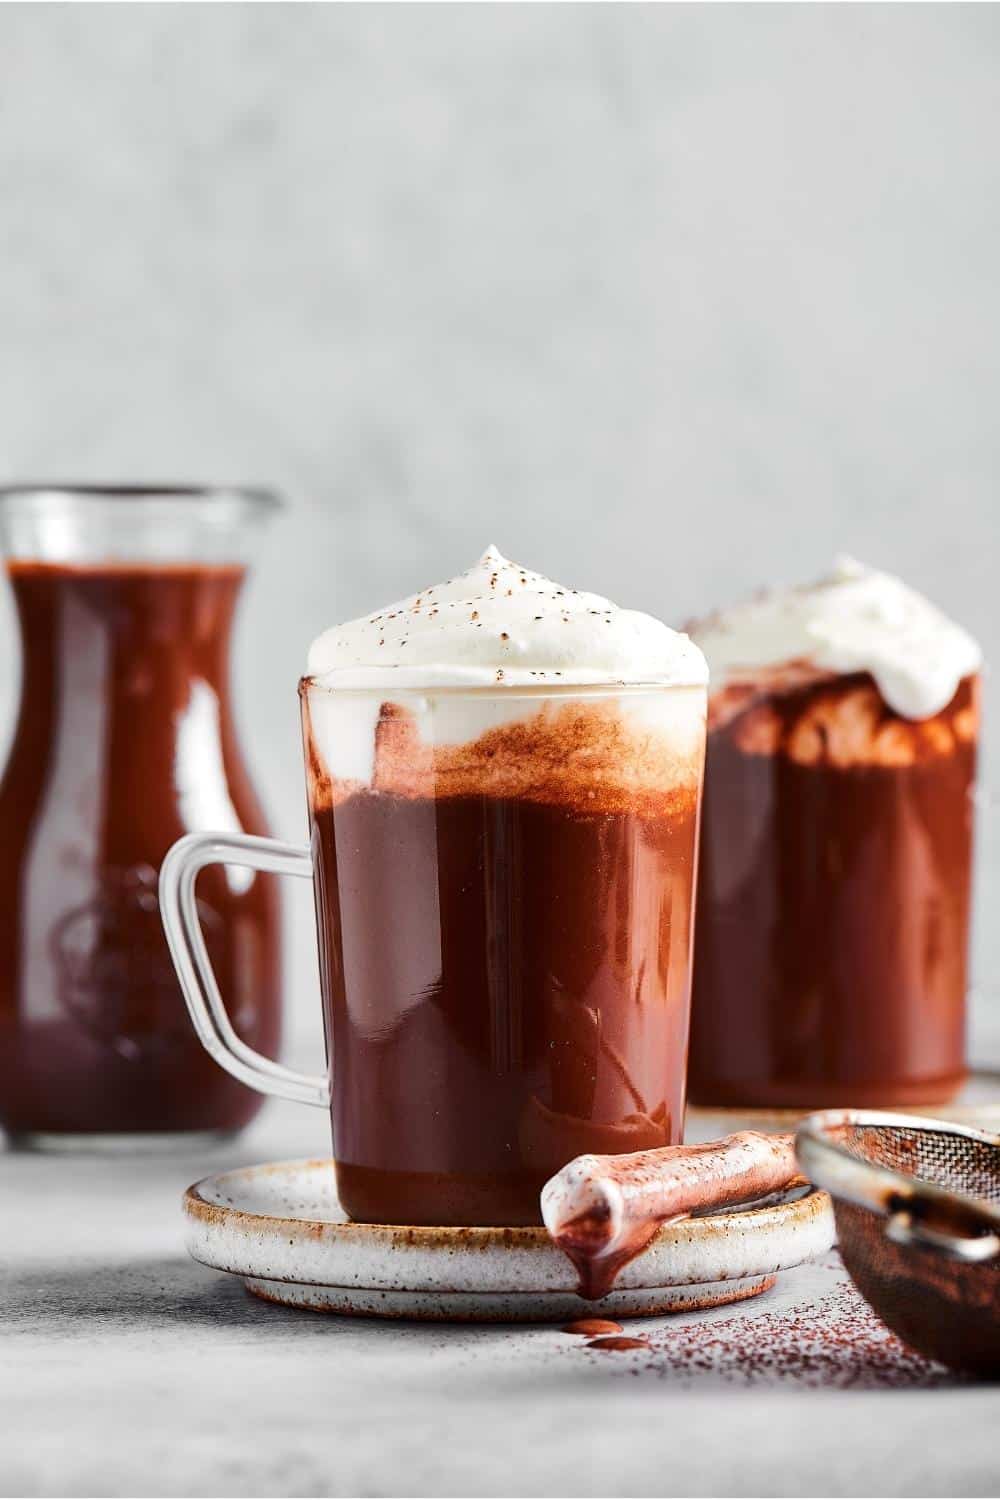 A glass cup of hot chocolate with whipped cream on top and a small plate. Behind it to the right is another cup of hot chocolate and to the left of that as a glass pitcher filled with hot chocolate.